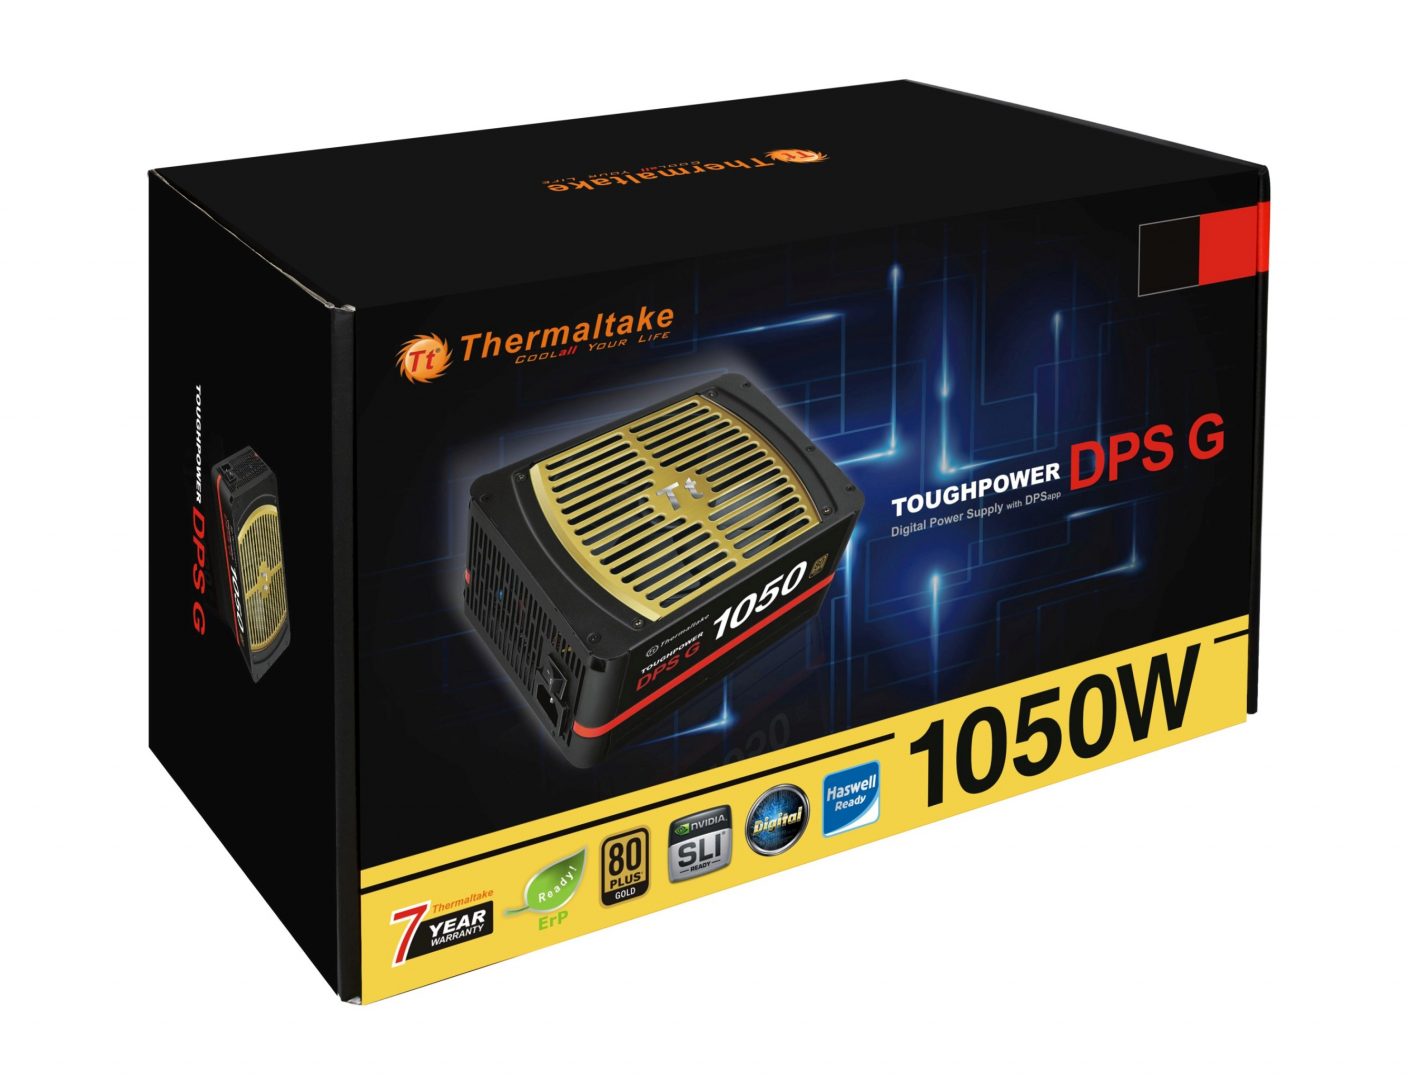 Thermaltake Toughpower DPS G Gold Series Smart Power Supply Units Smart Power Management Supported